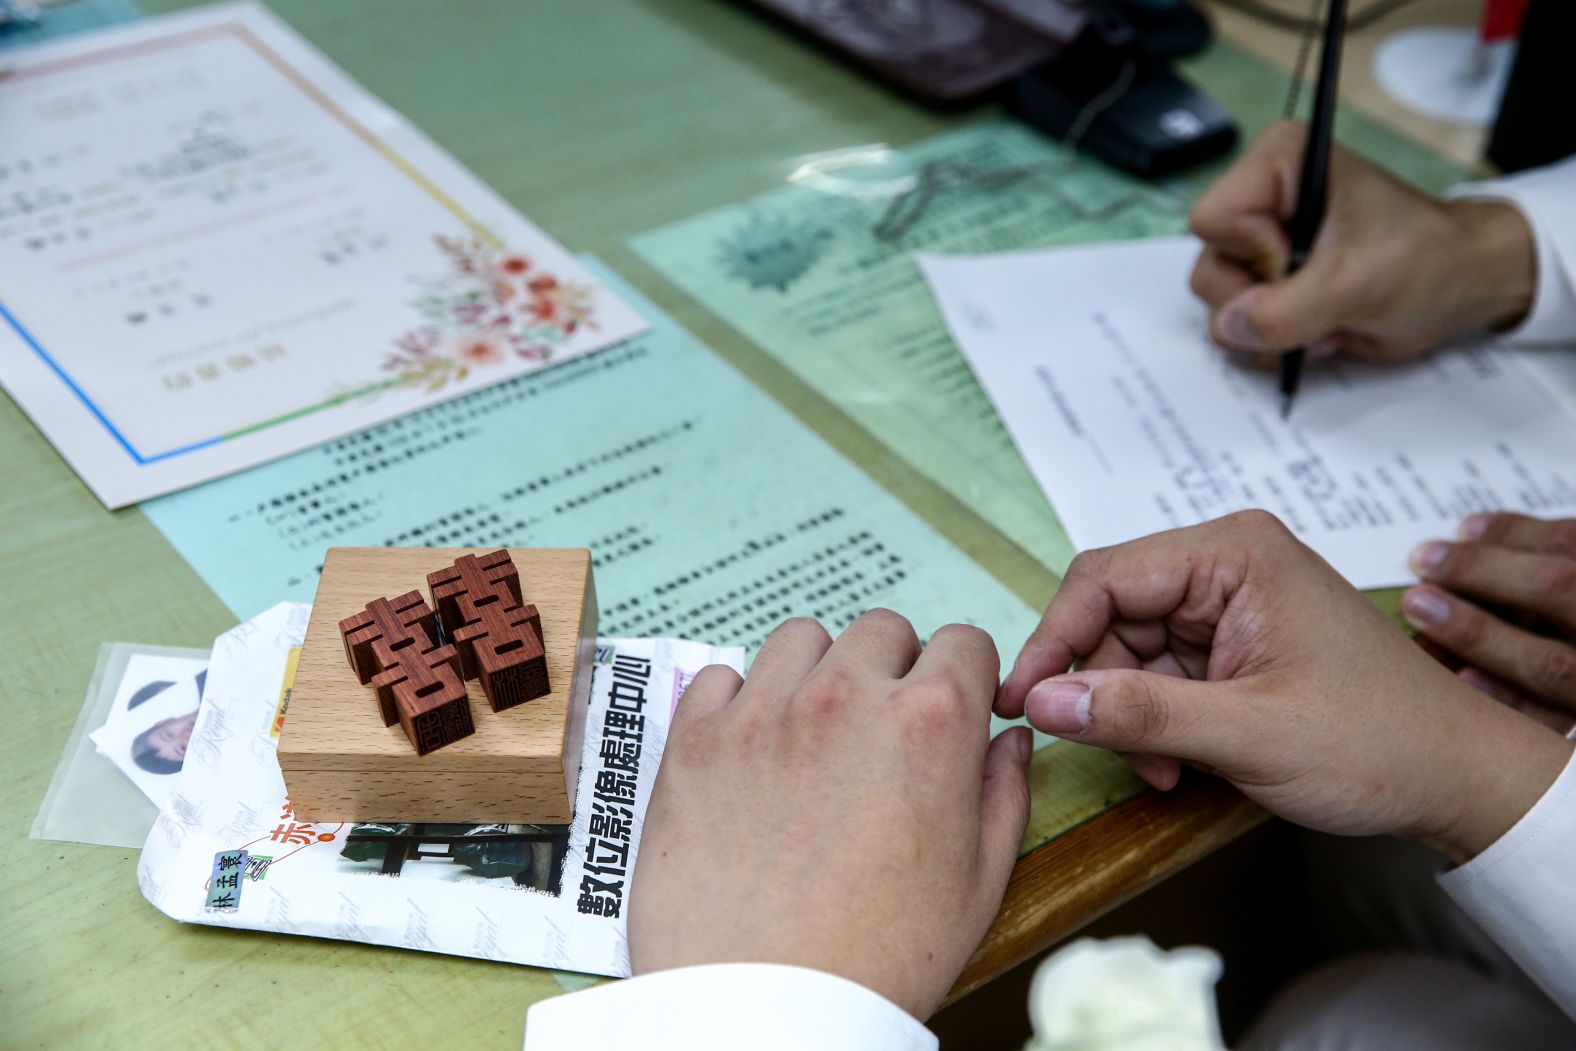 A same-sex couple brings a wooden stamp to their marriage registration. The Chinese characters symbolize the common word for wedding.